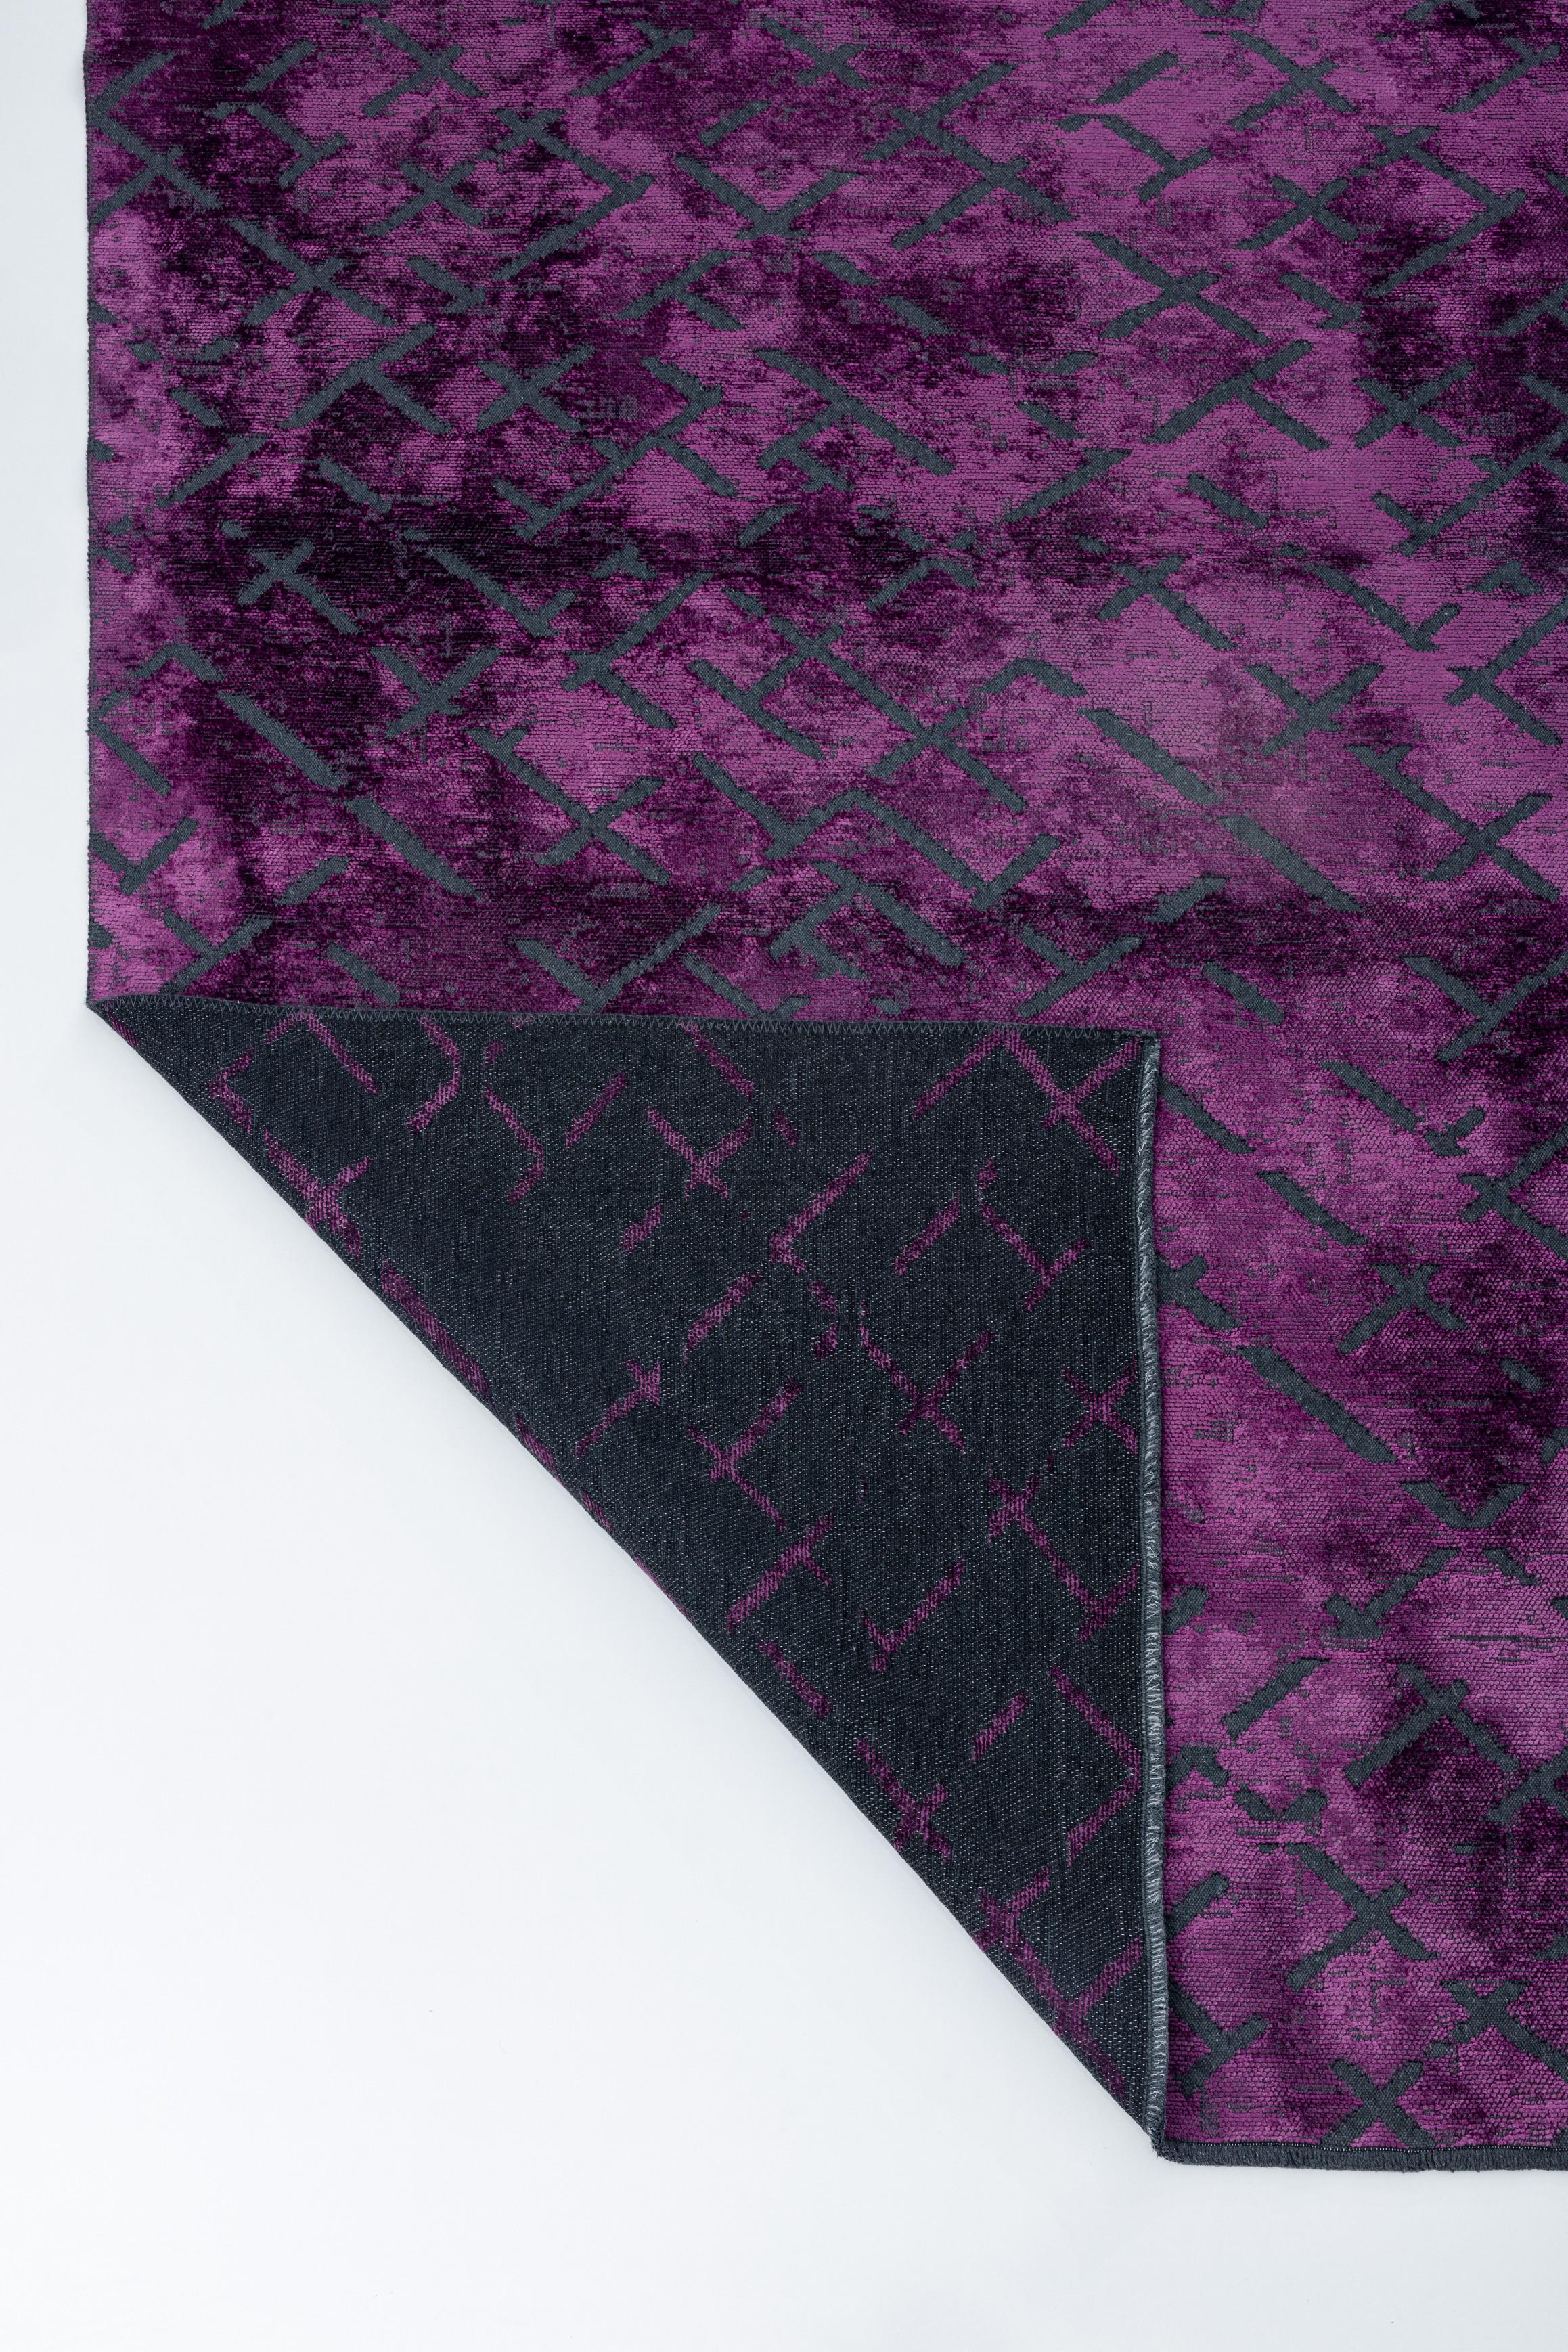 For Sale:  (Purple) Modern Abstract Luxury Hand-Finished Area Rug 3